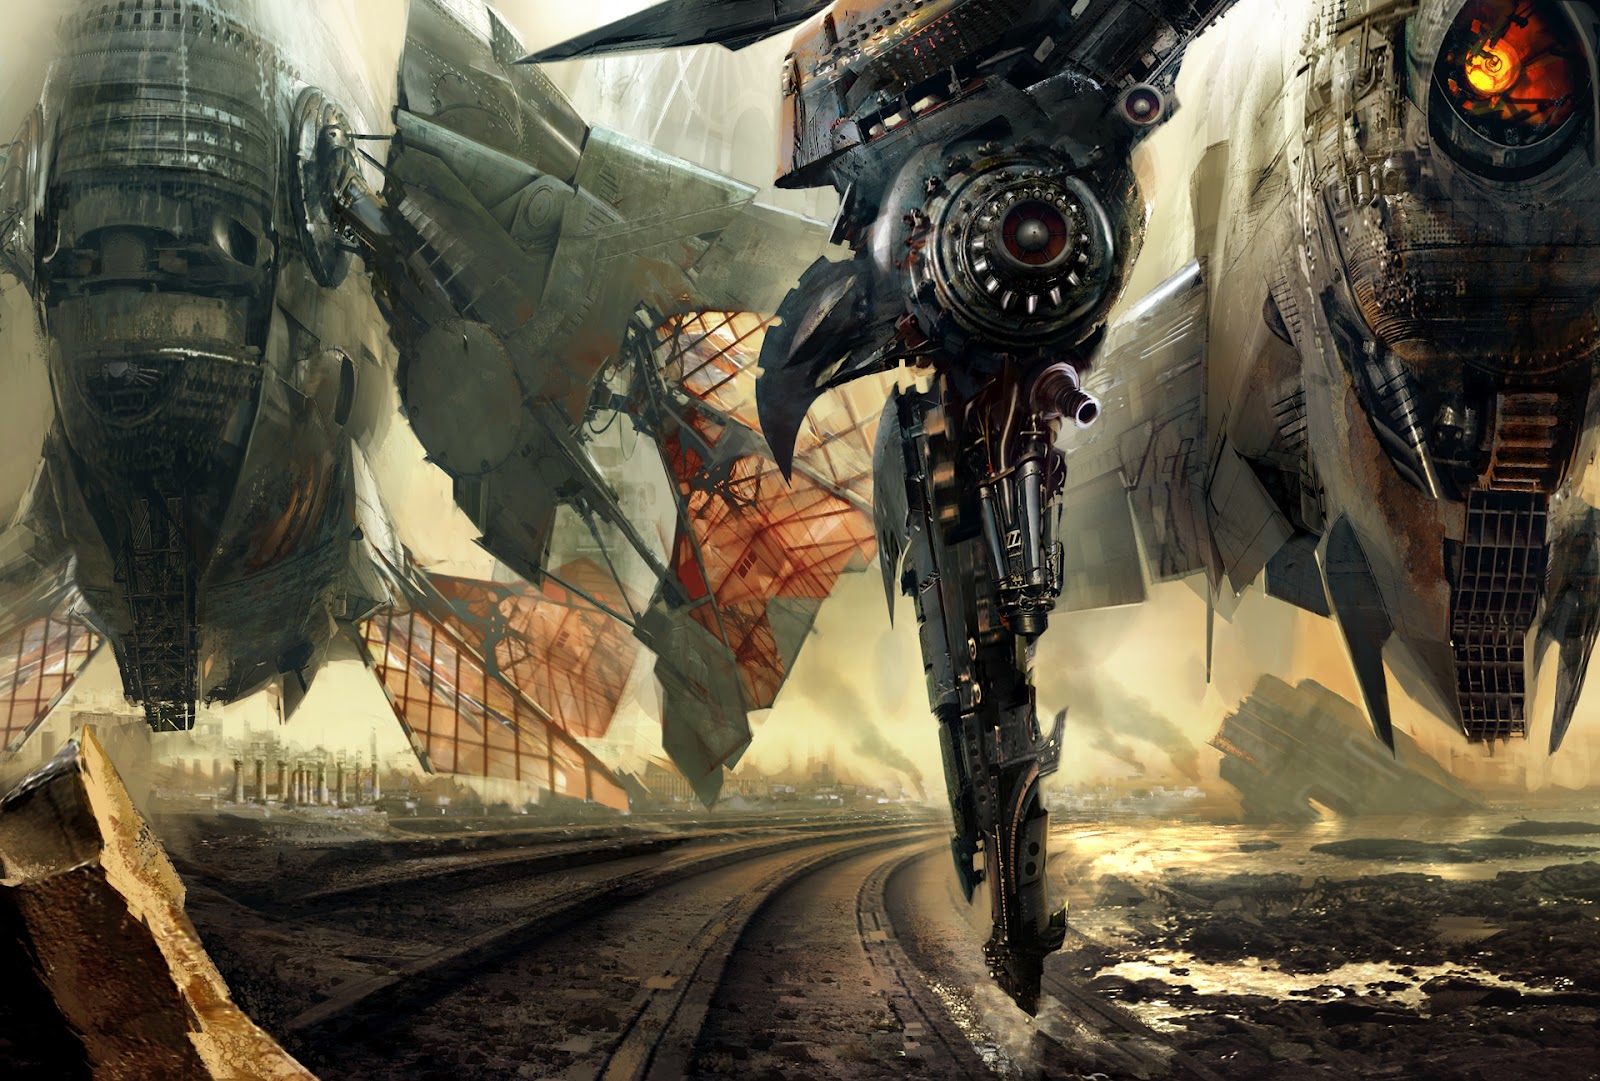 steampunk wallpaper,action adventure game,pc game,cg artwork,games,fictional character